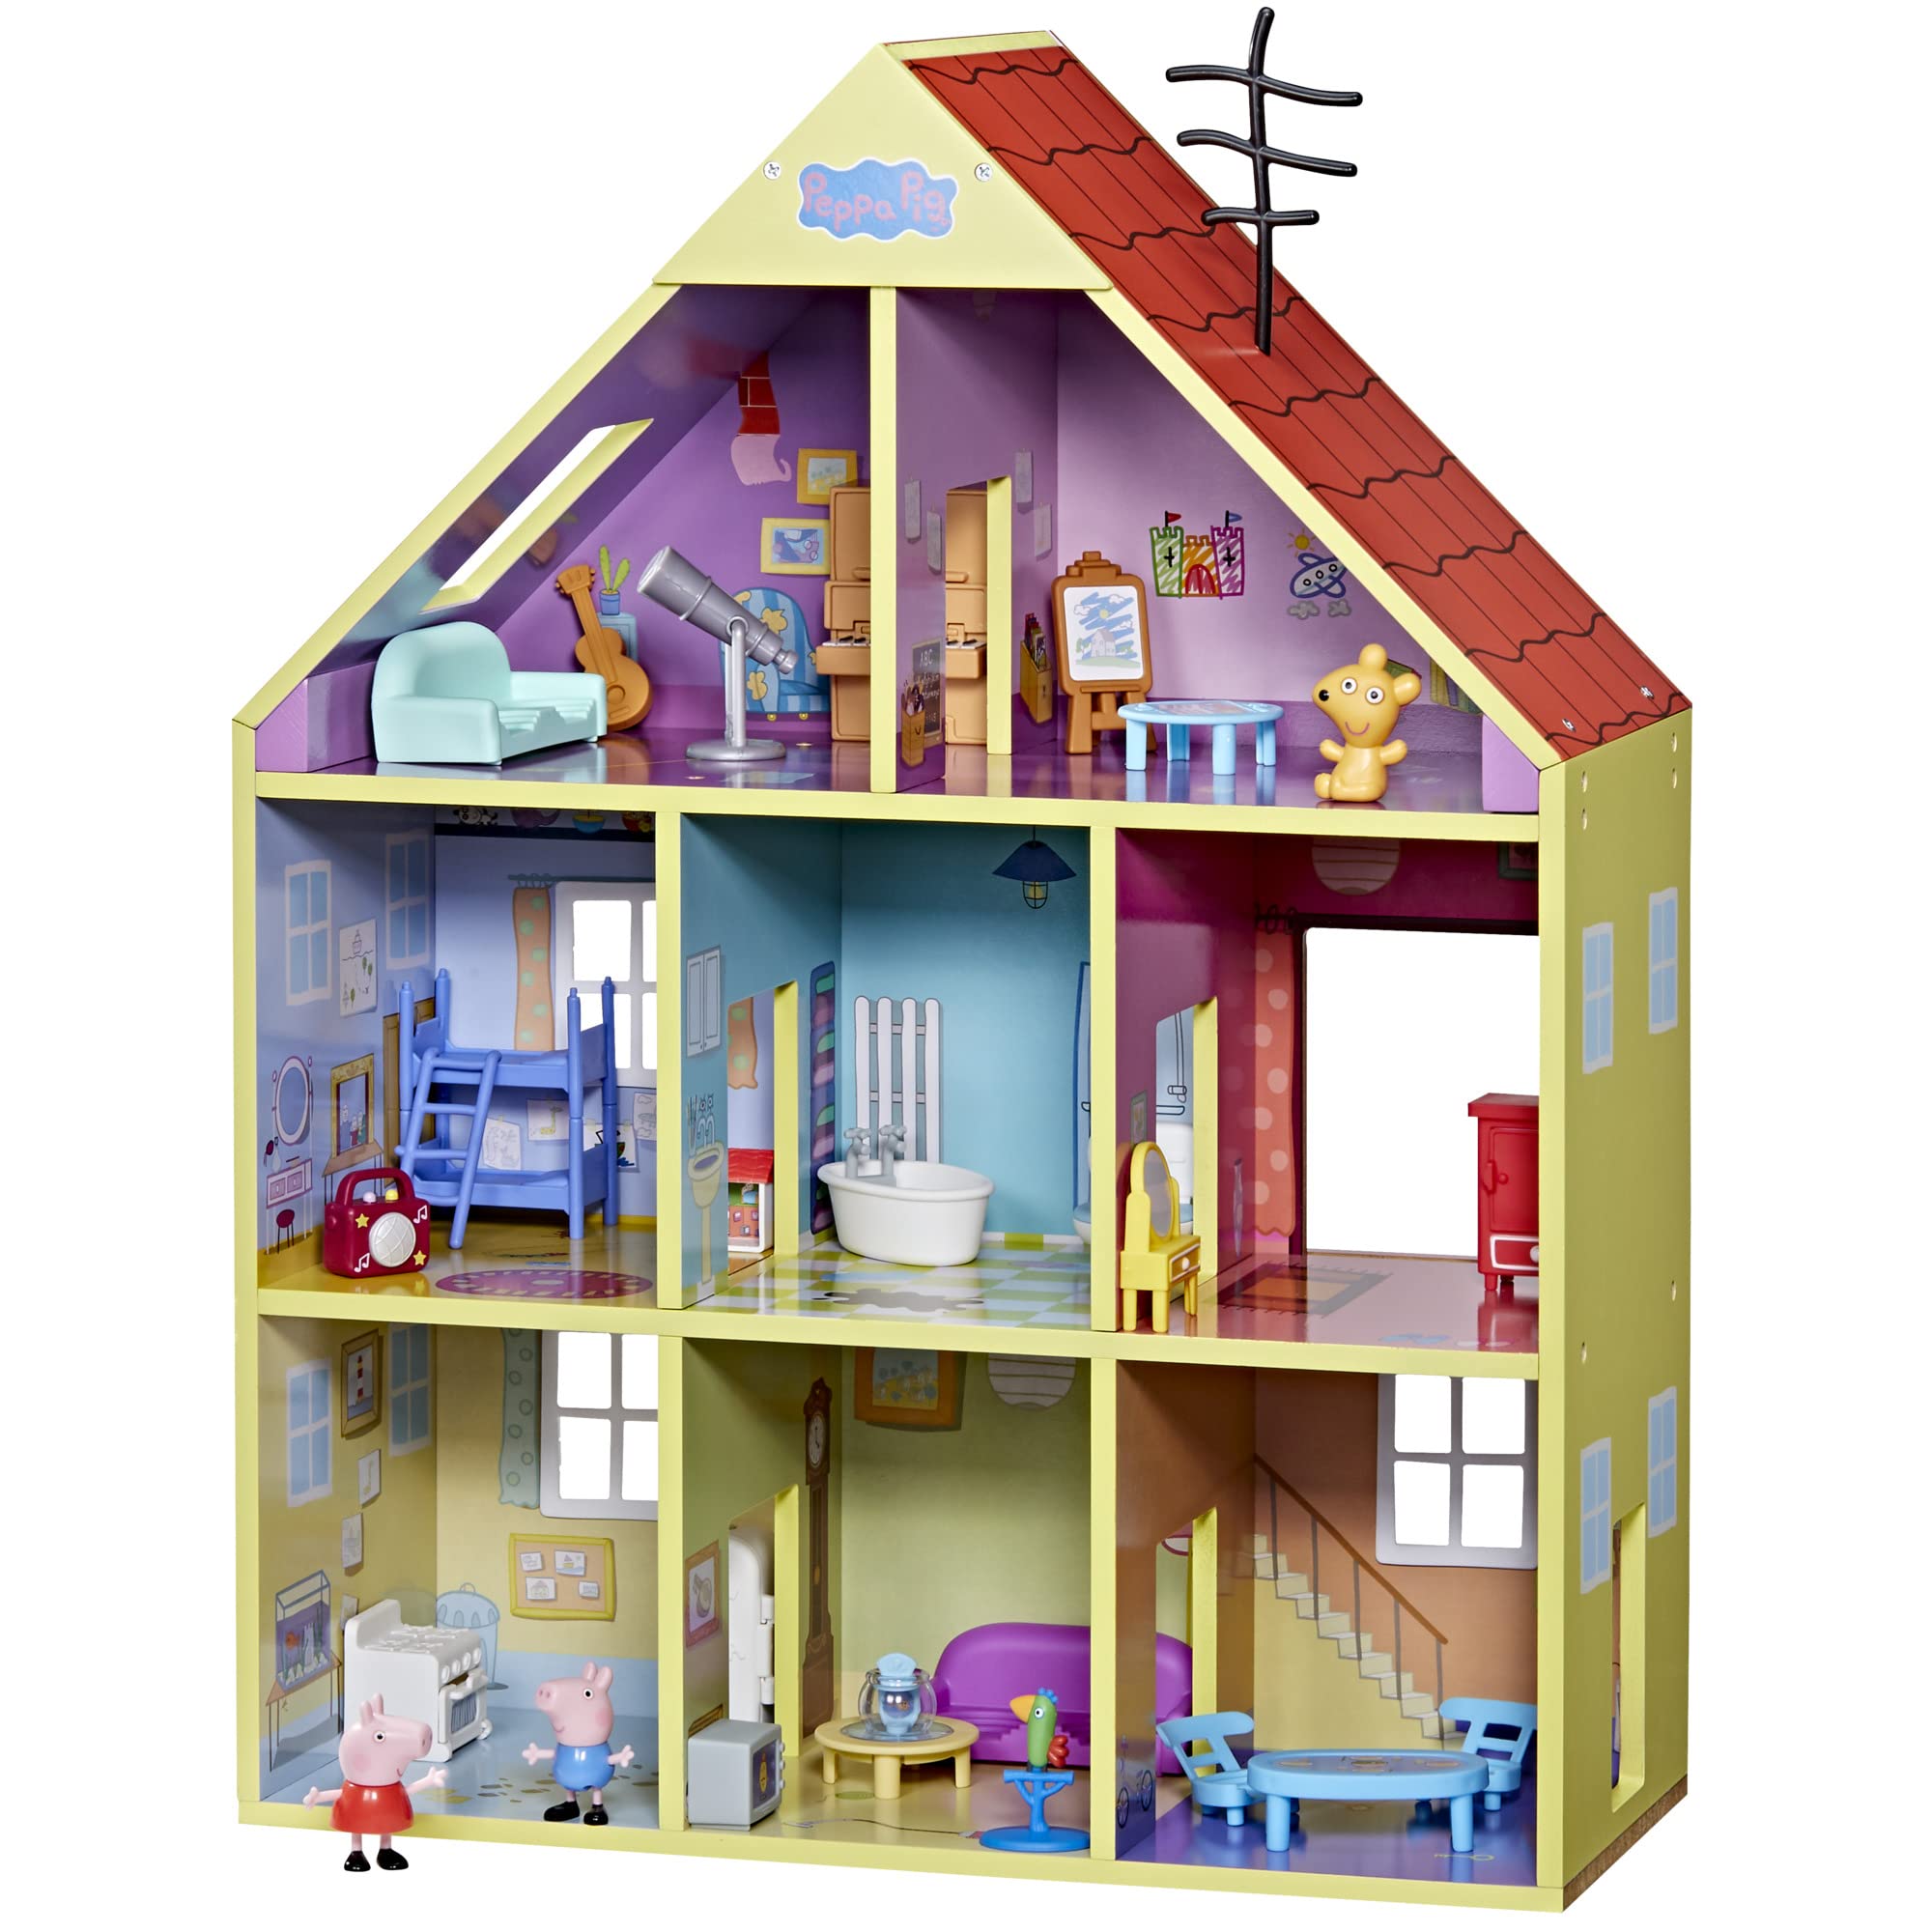 Peppa Pig Wooden Deluxe Playhouse, 8 Rooms, Includes 2 Fun Figures and 29 Accessories, Made of Responsibly Sourced Wood, for Ages 3 and Up (Amazon Exclusive)